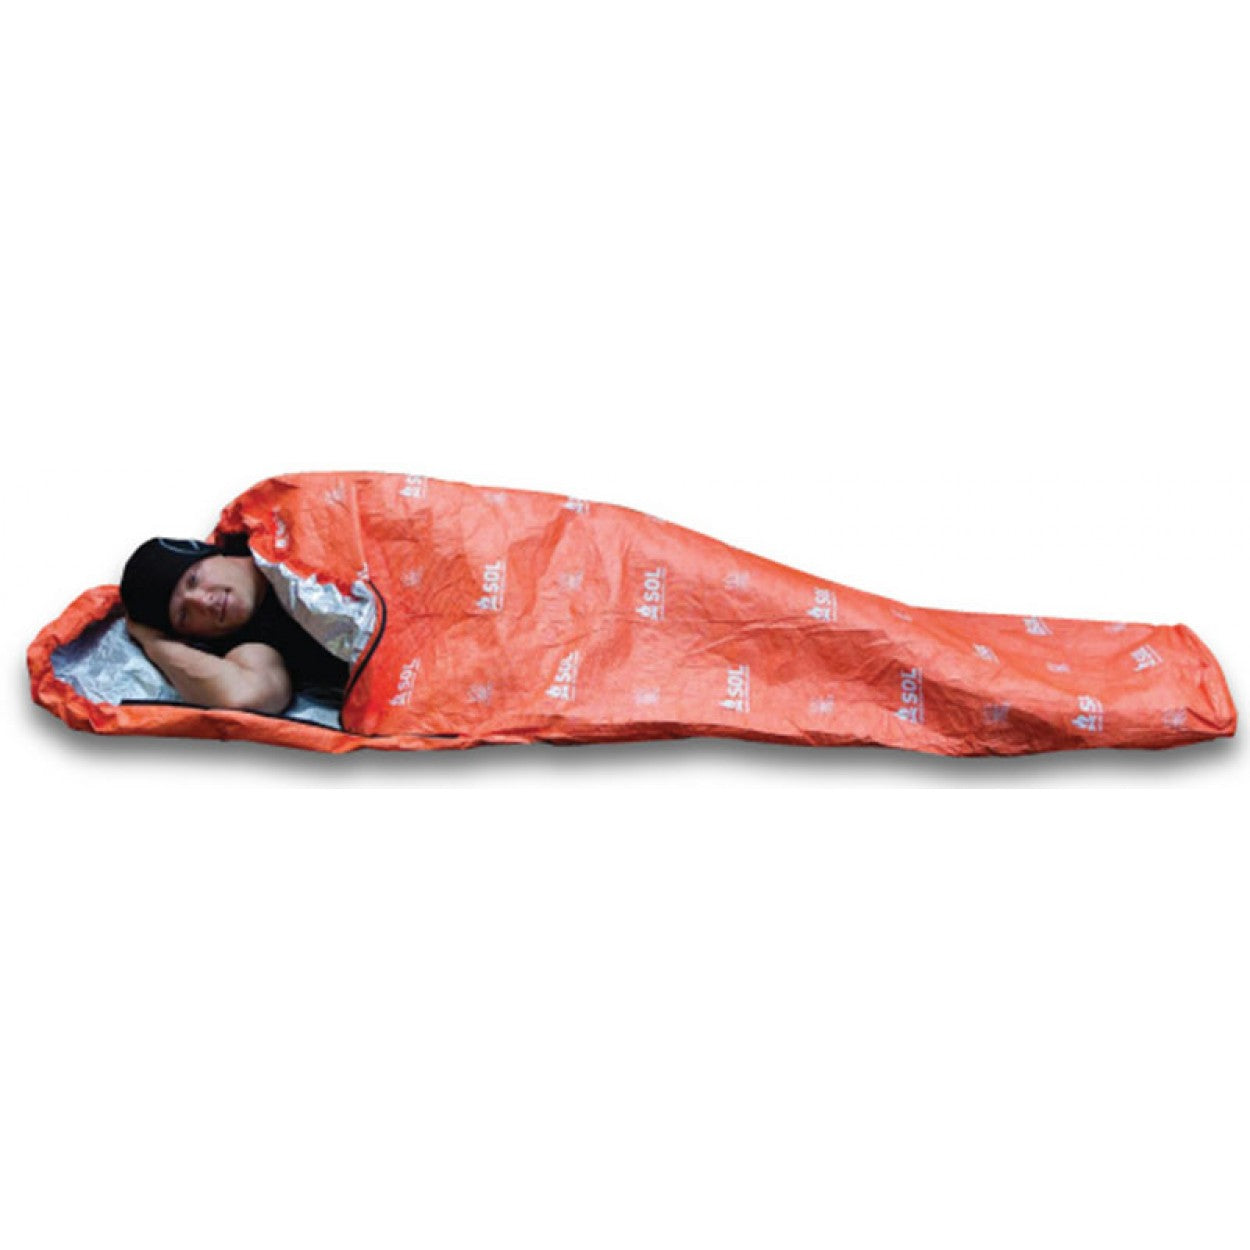 Sol Escape Bivvy - Survival Orange -  - Mansfield Hunting & Fishing - Products to prepare for Corona Virus